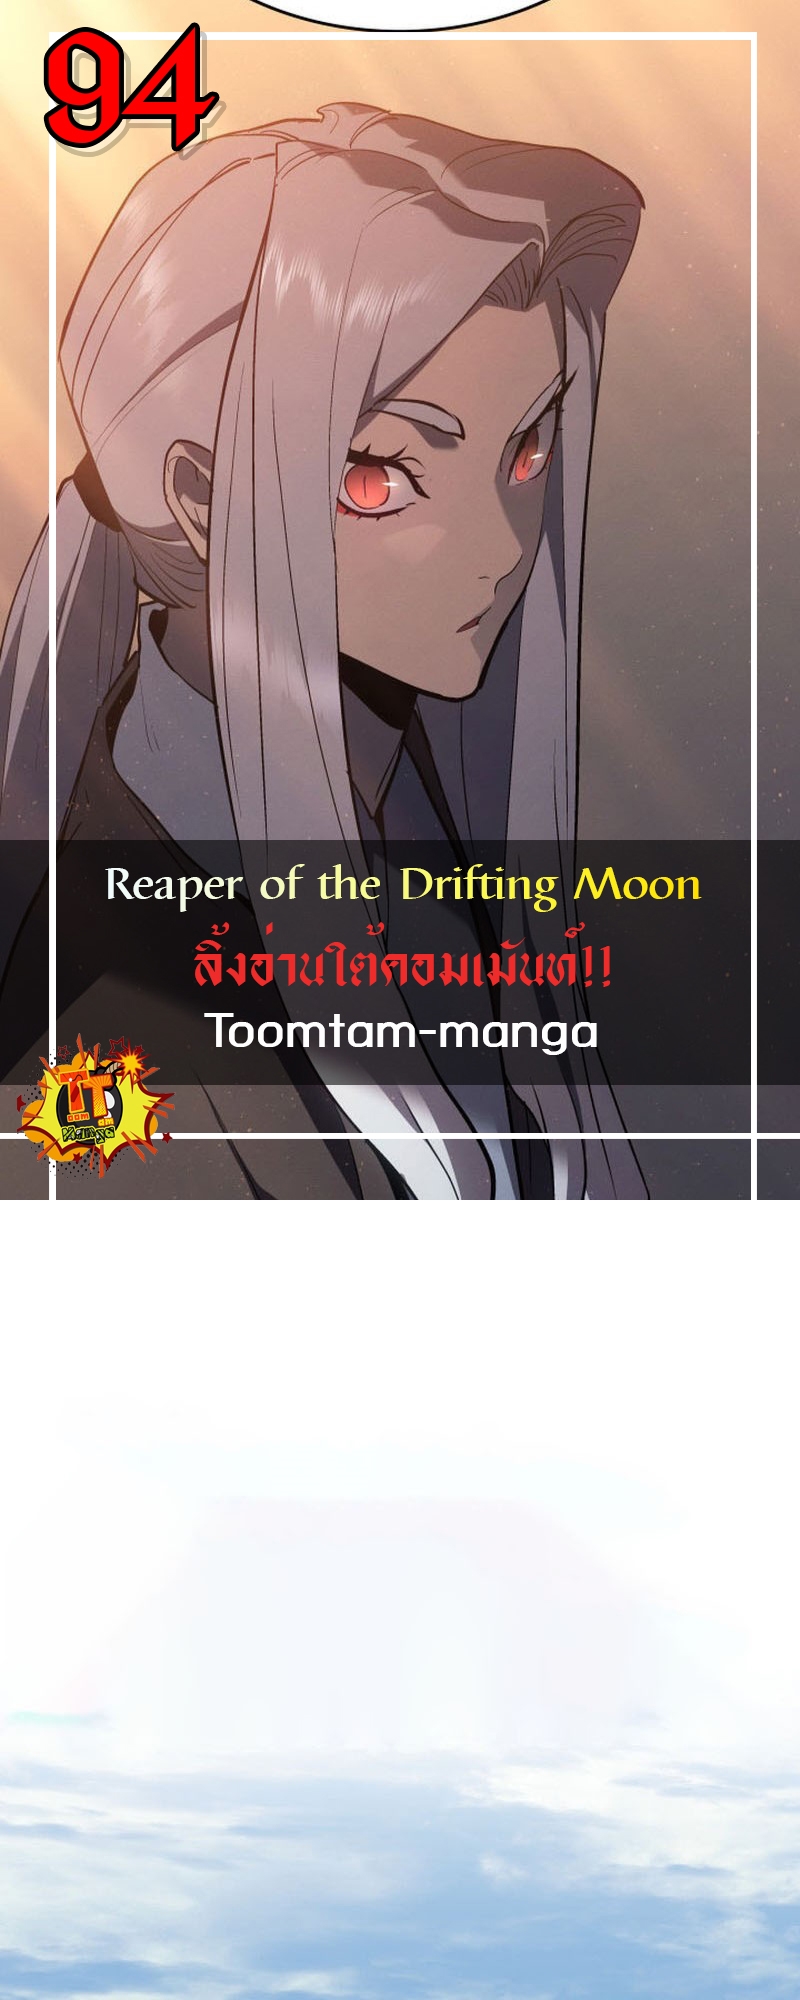 Reaper of the Drifting Moon 94 4 07 25670001